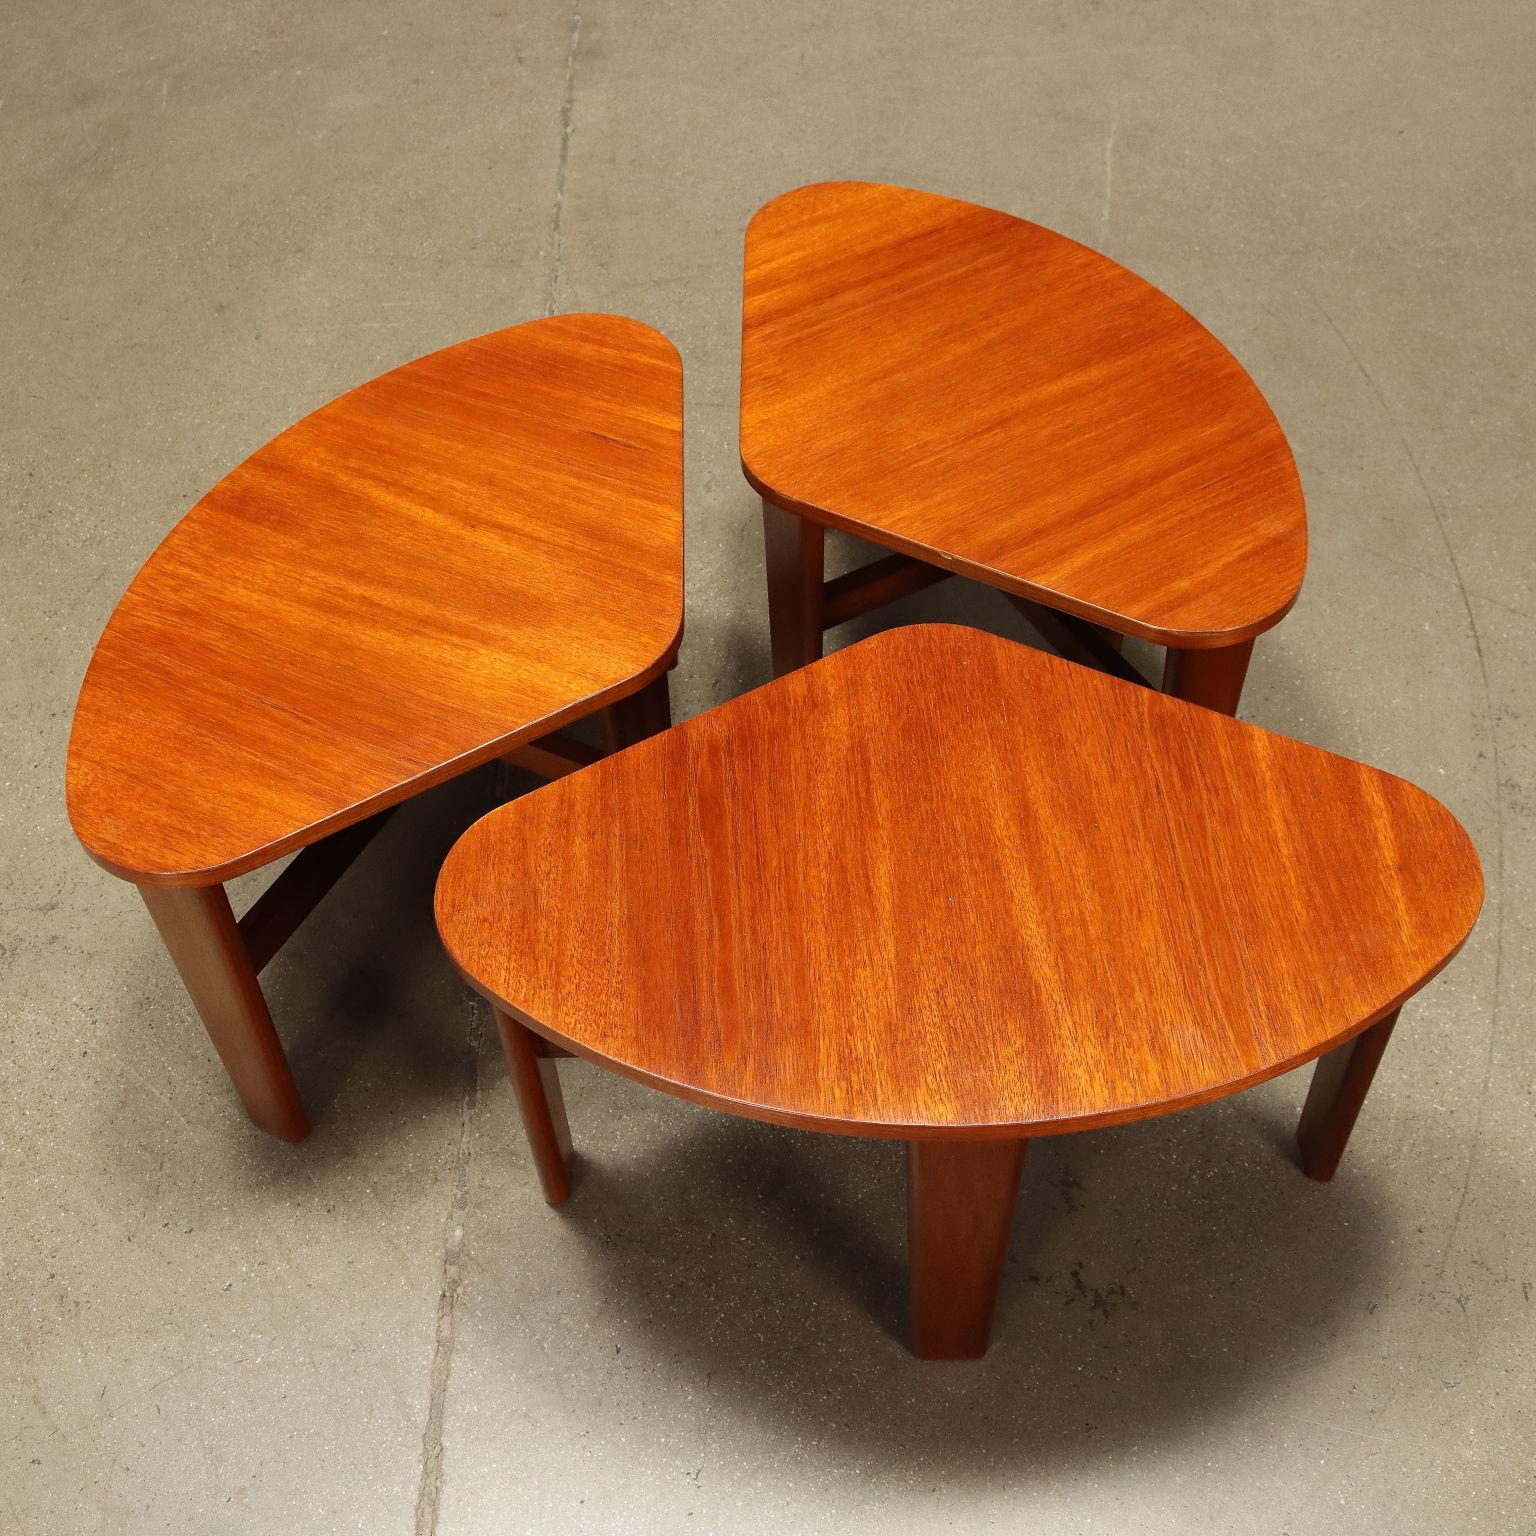 Mid-20th Century English Coffee Tables from the 1960s